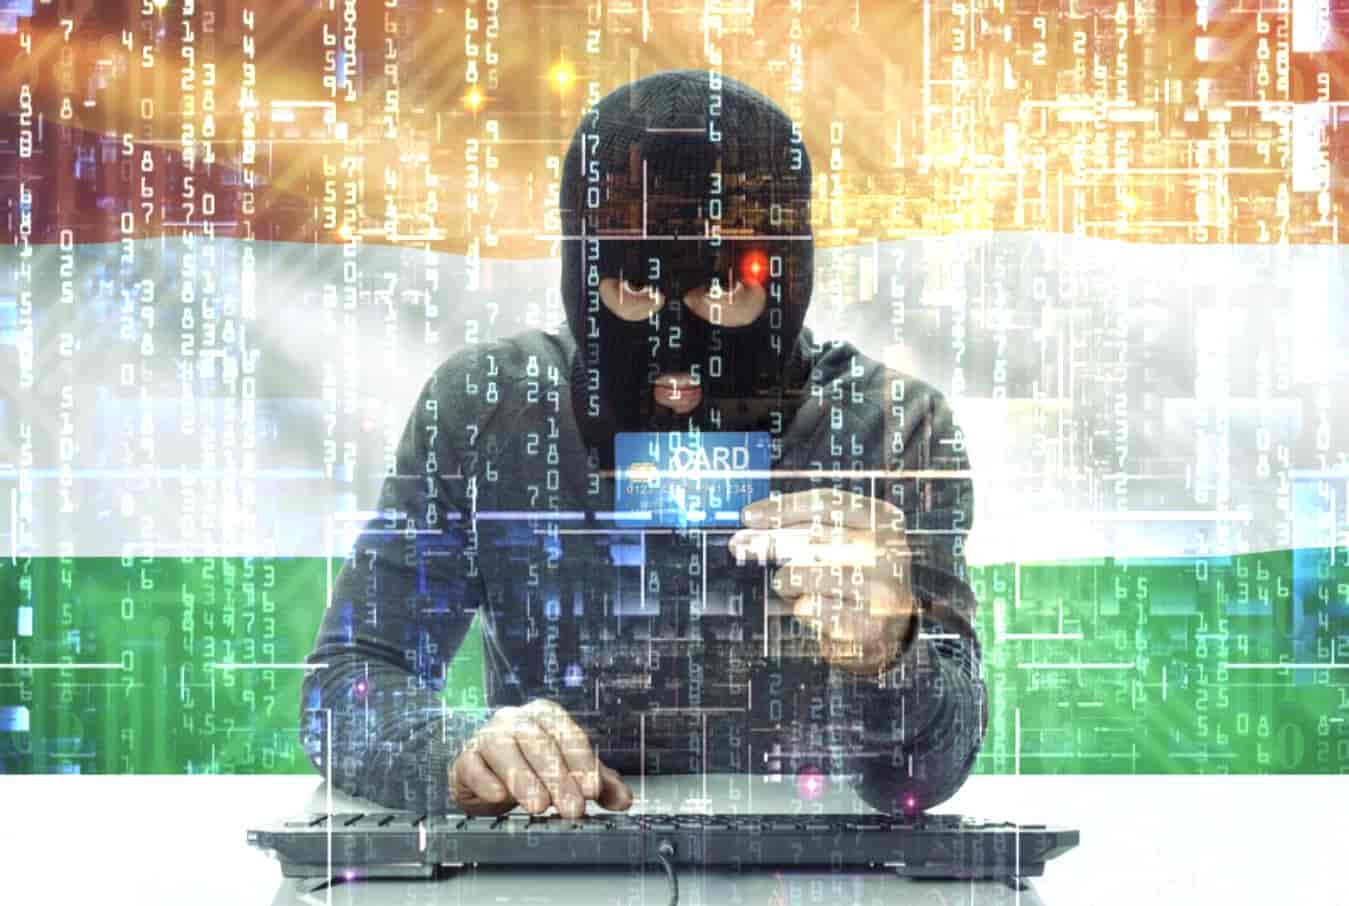 Largest database of Indian credit/debit card records leaked on dark web